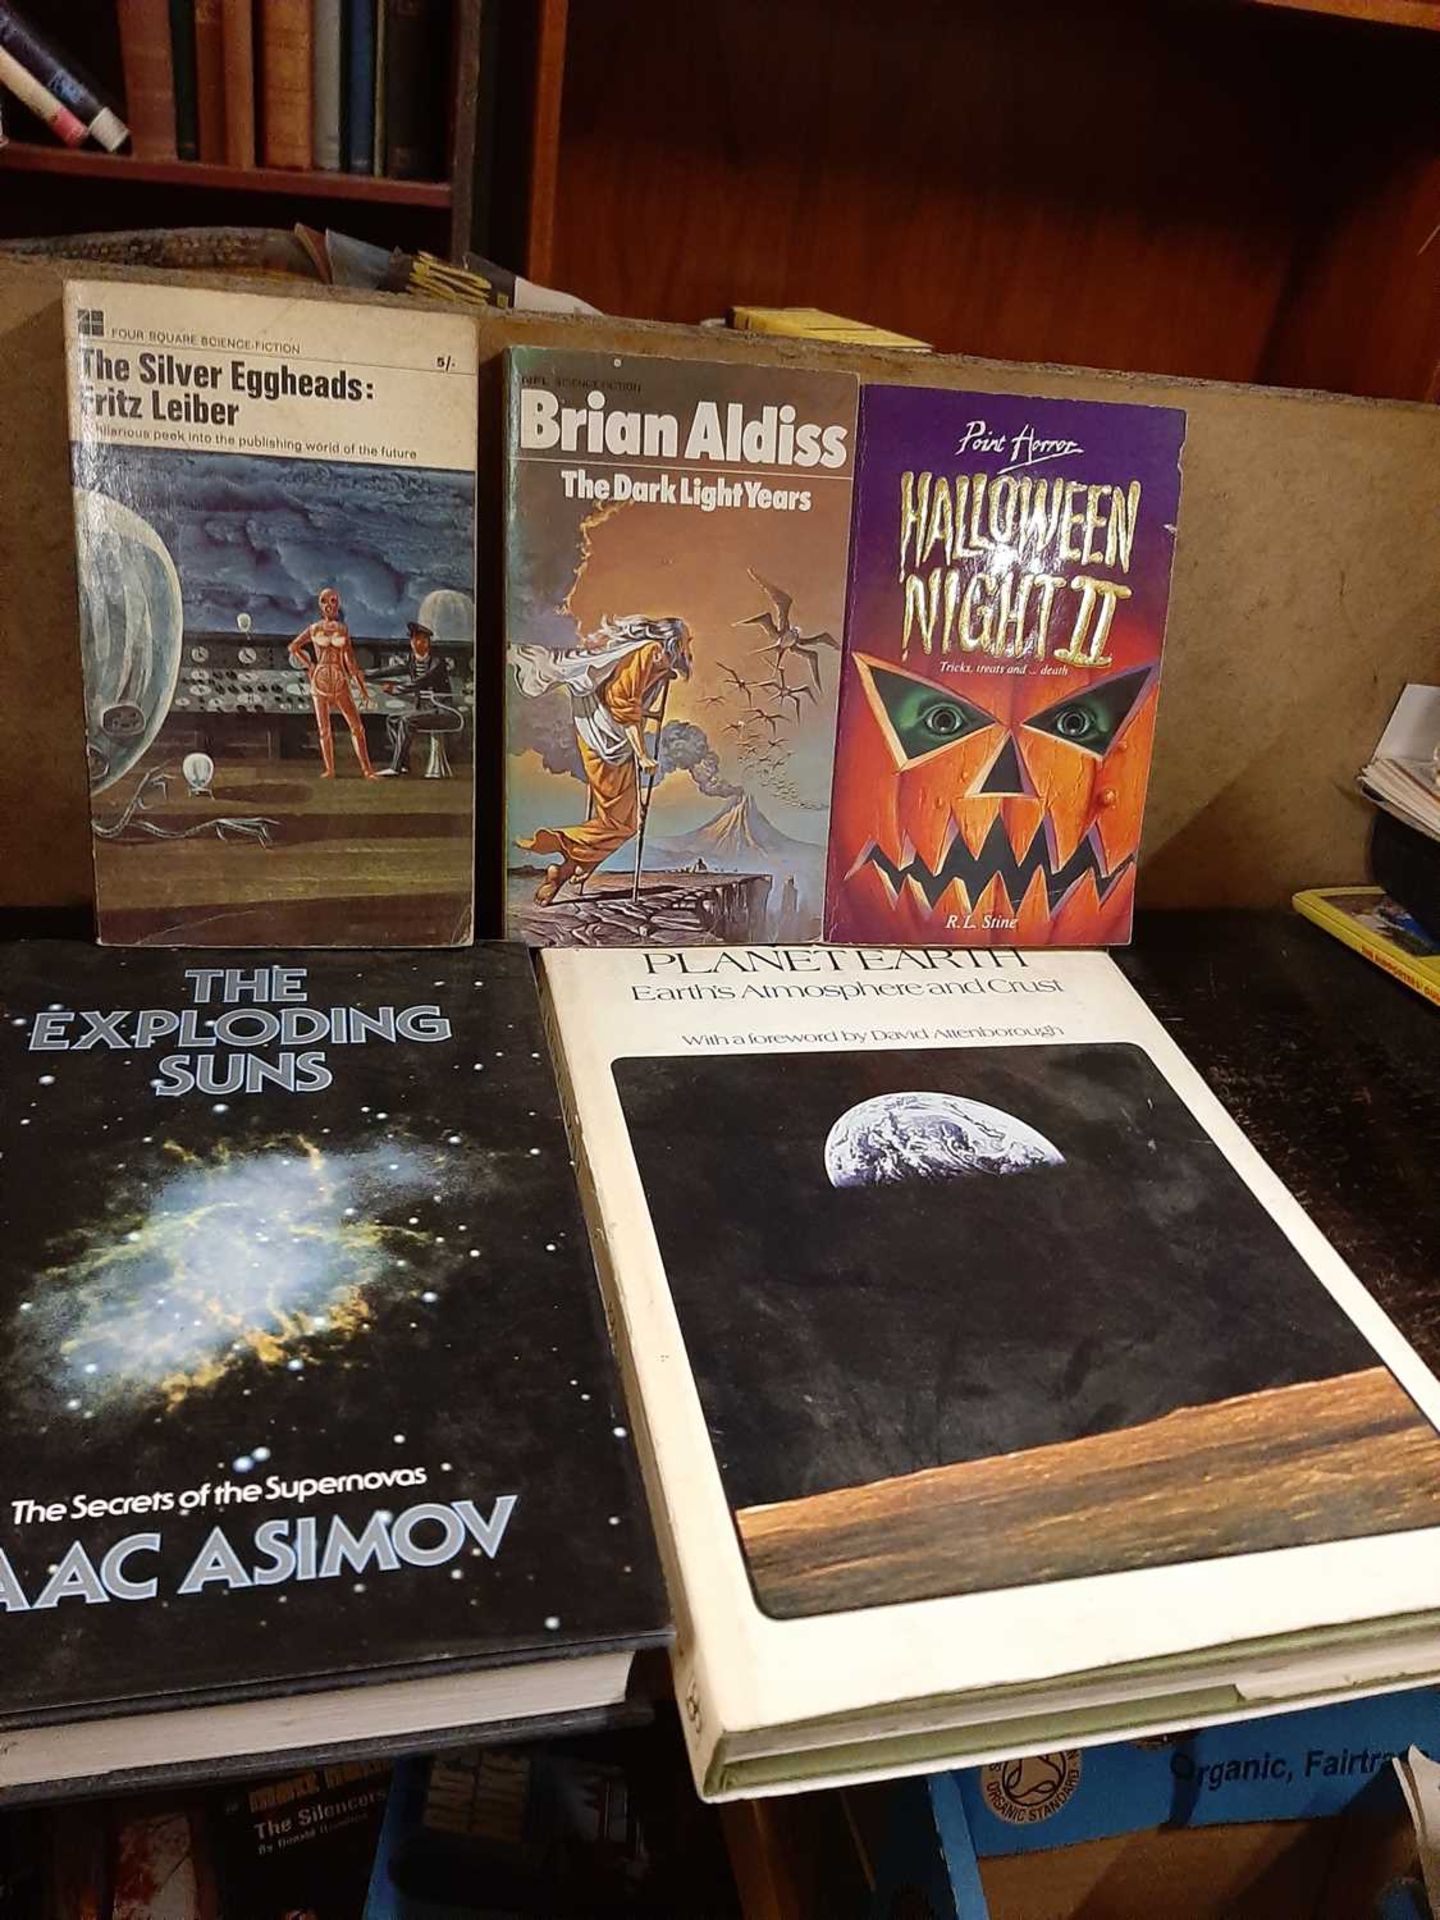 13 sci-fi/space books to include The Exploding Suns by Isaac Asimov, Great Science Fiction stories - Image 2 of 3